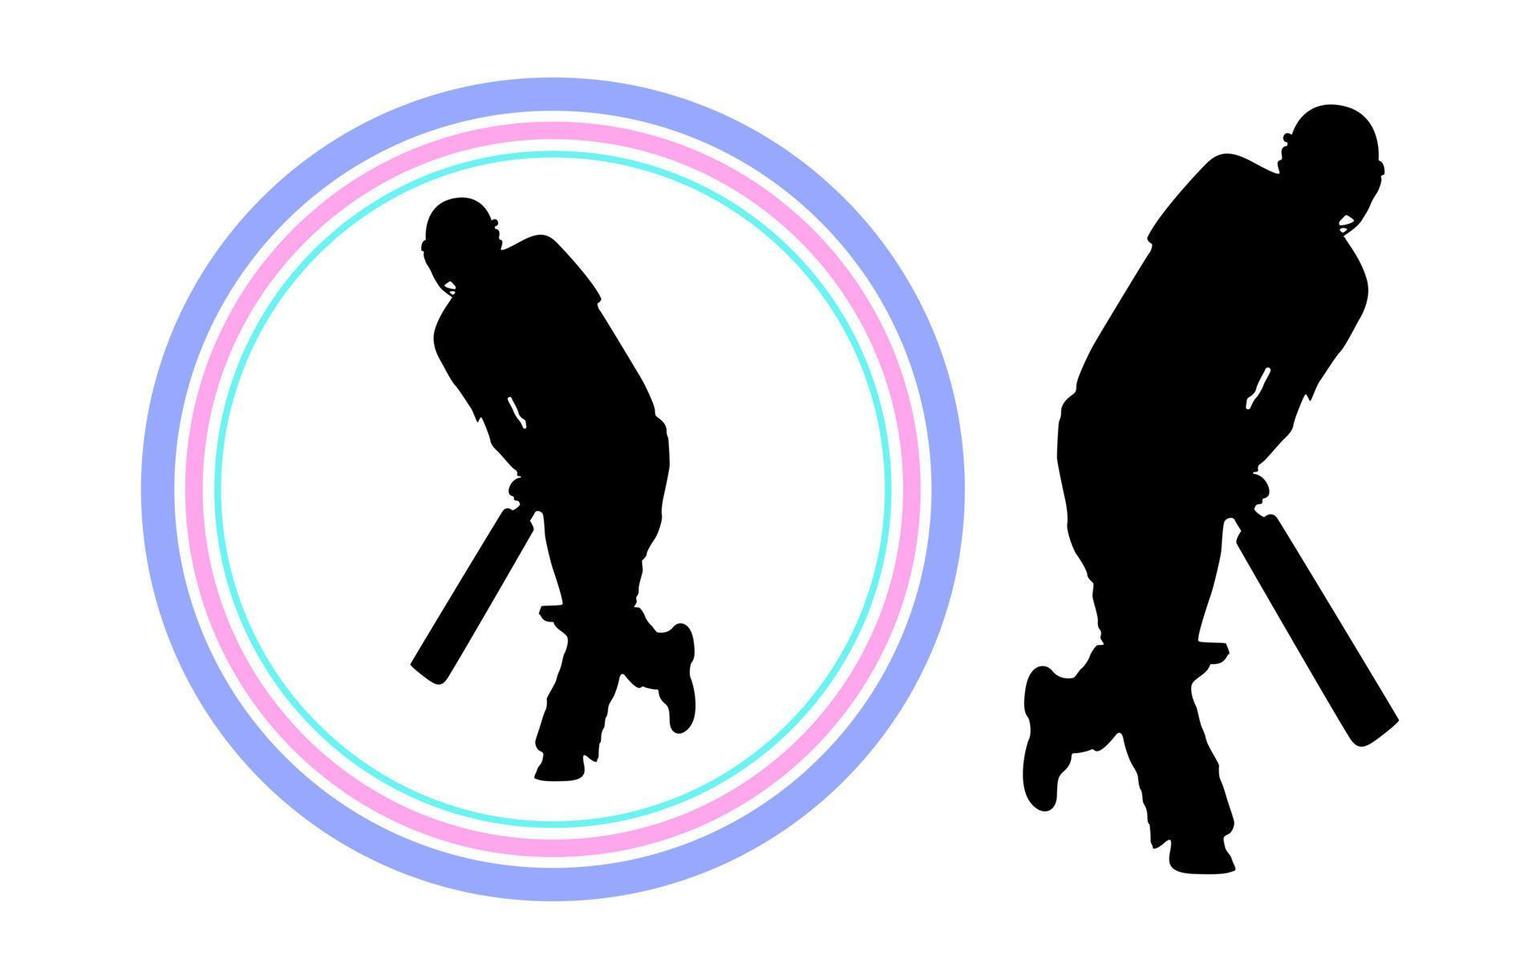 Cricket sports player Silhouette free, Cricket Player Silhouette, Cricket player logo Silhouette, silhouettes of cricket player, Kneeling Bat Swing vector